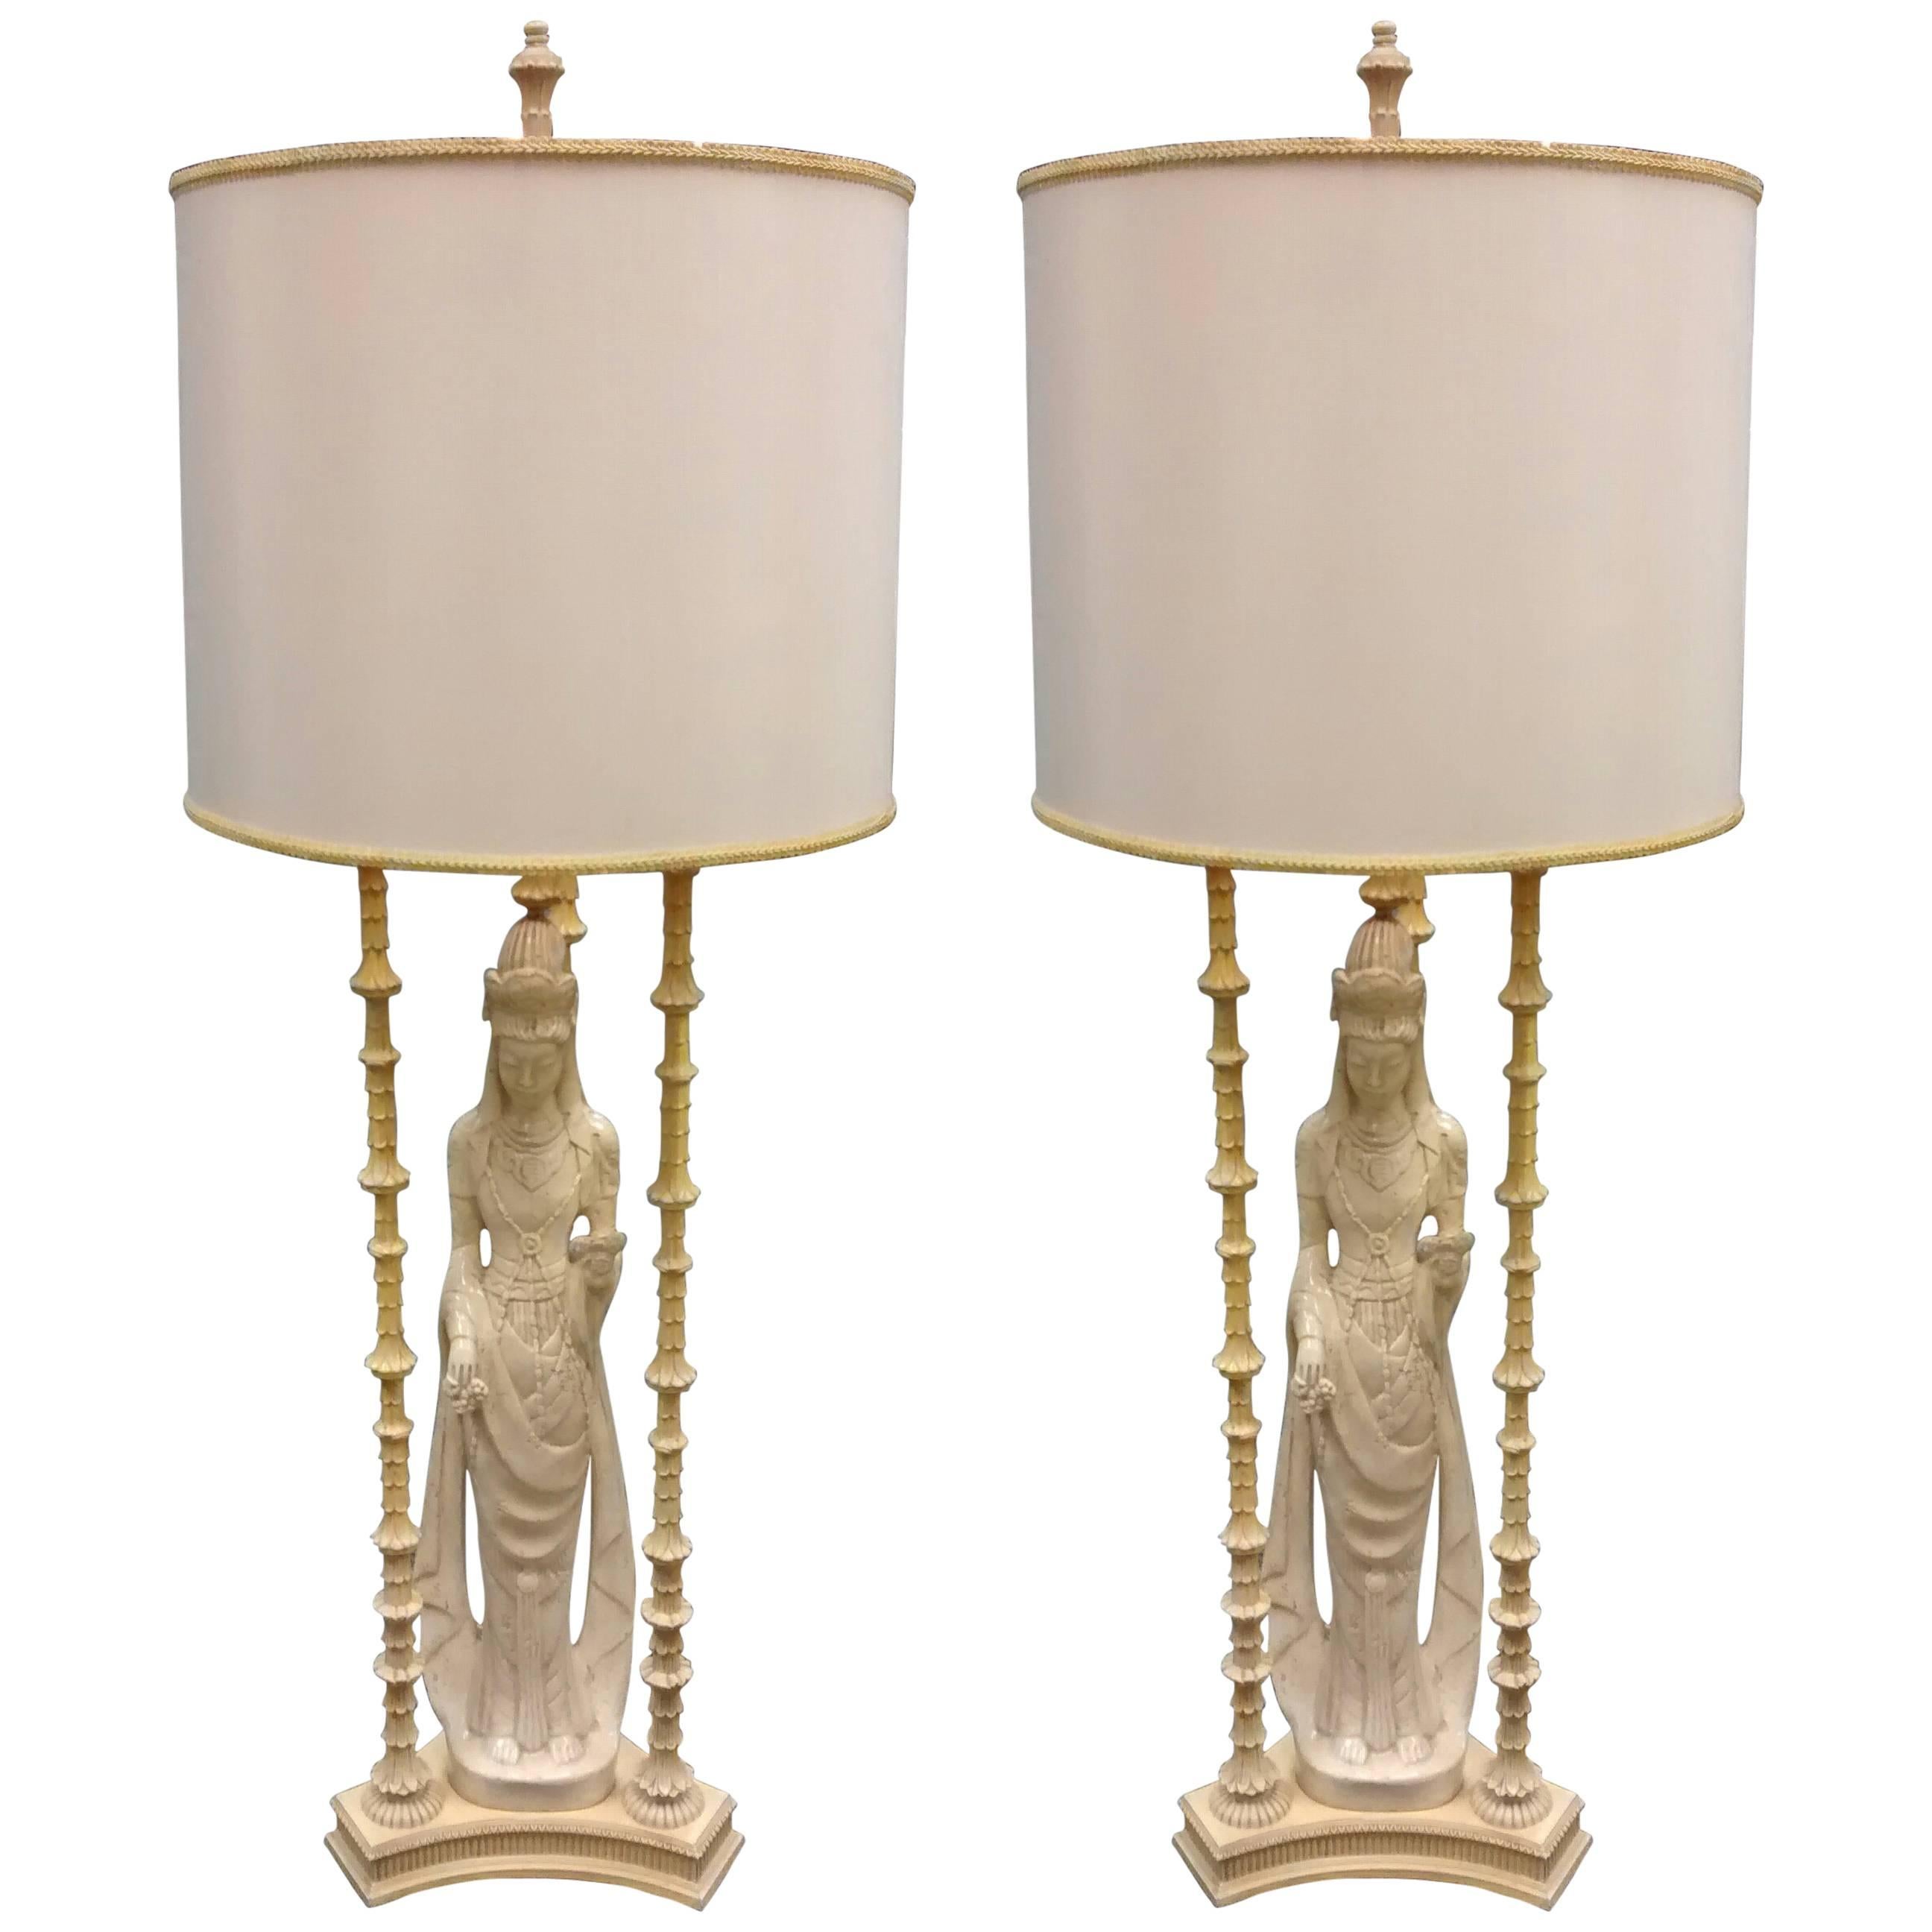 Pair of Monumental James Mont or Tony Duquette Style Quan Yin Table Lamps For Sale